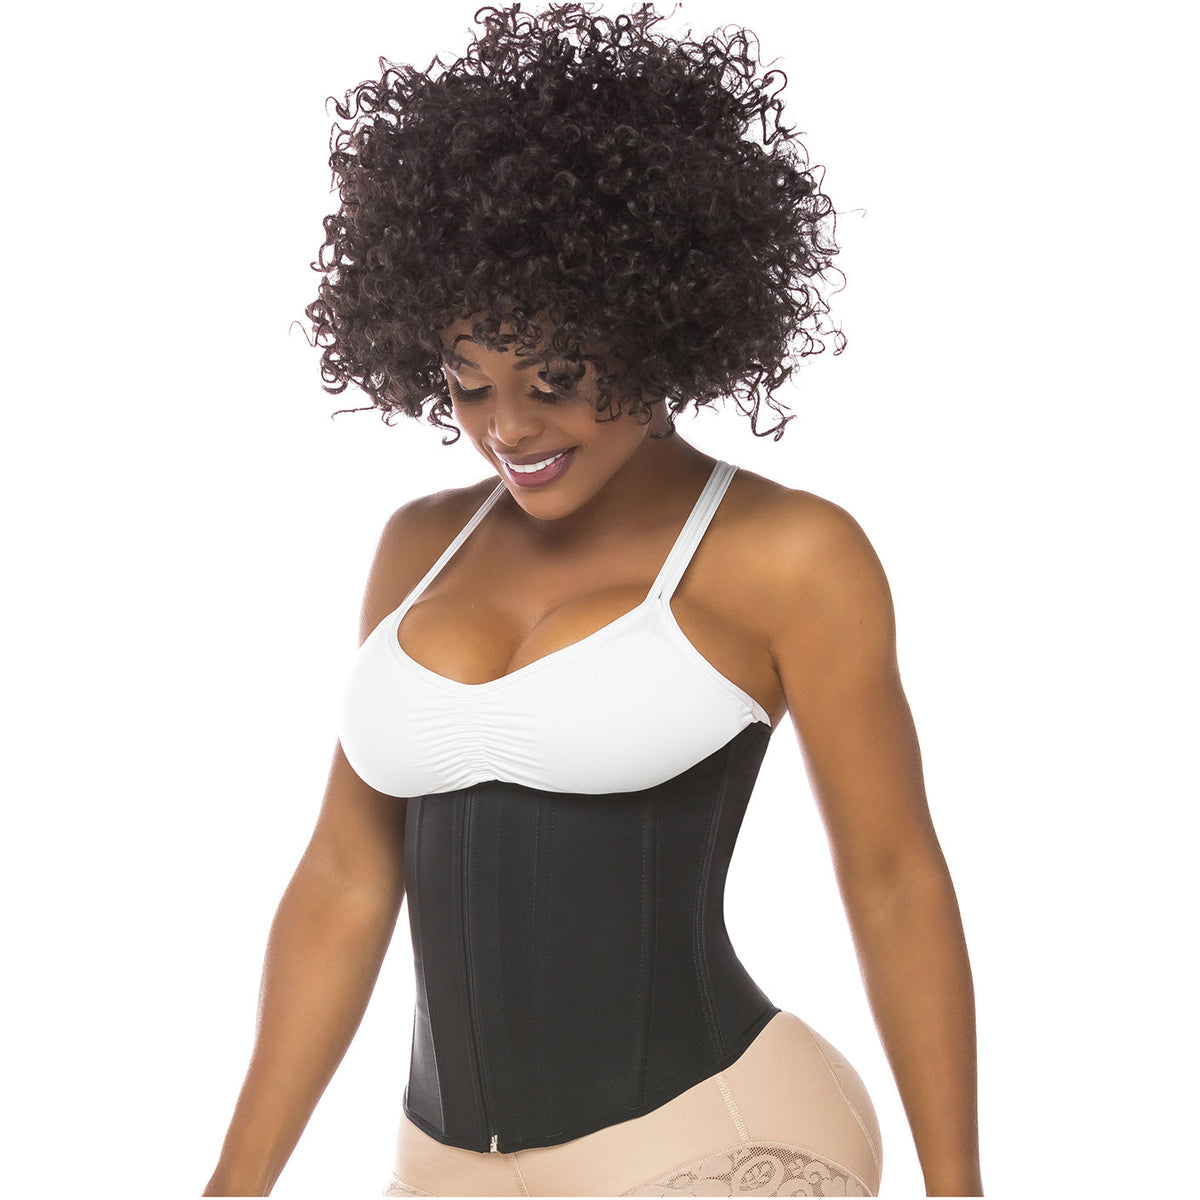 Fajas Salome 0315-1 | Waist Cincher Trainer for Women | Colombian Body Shaper for Daily Use